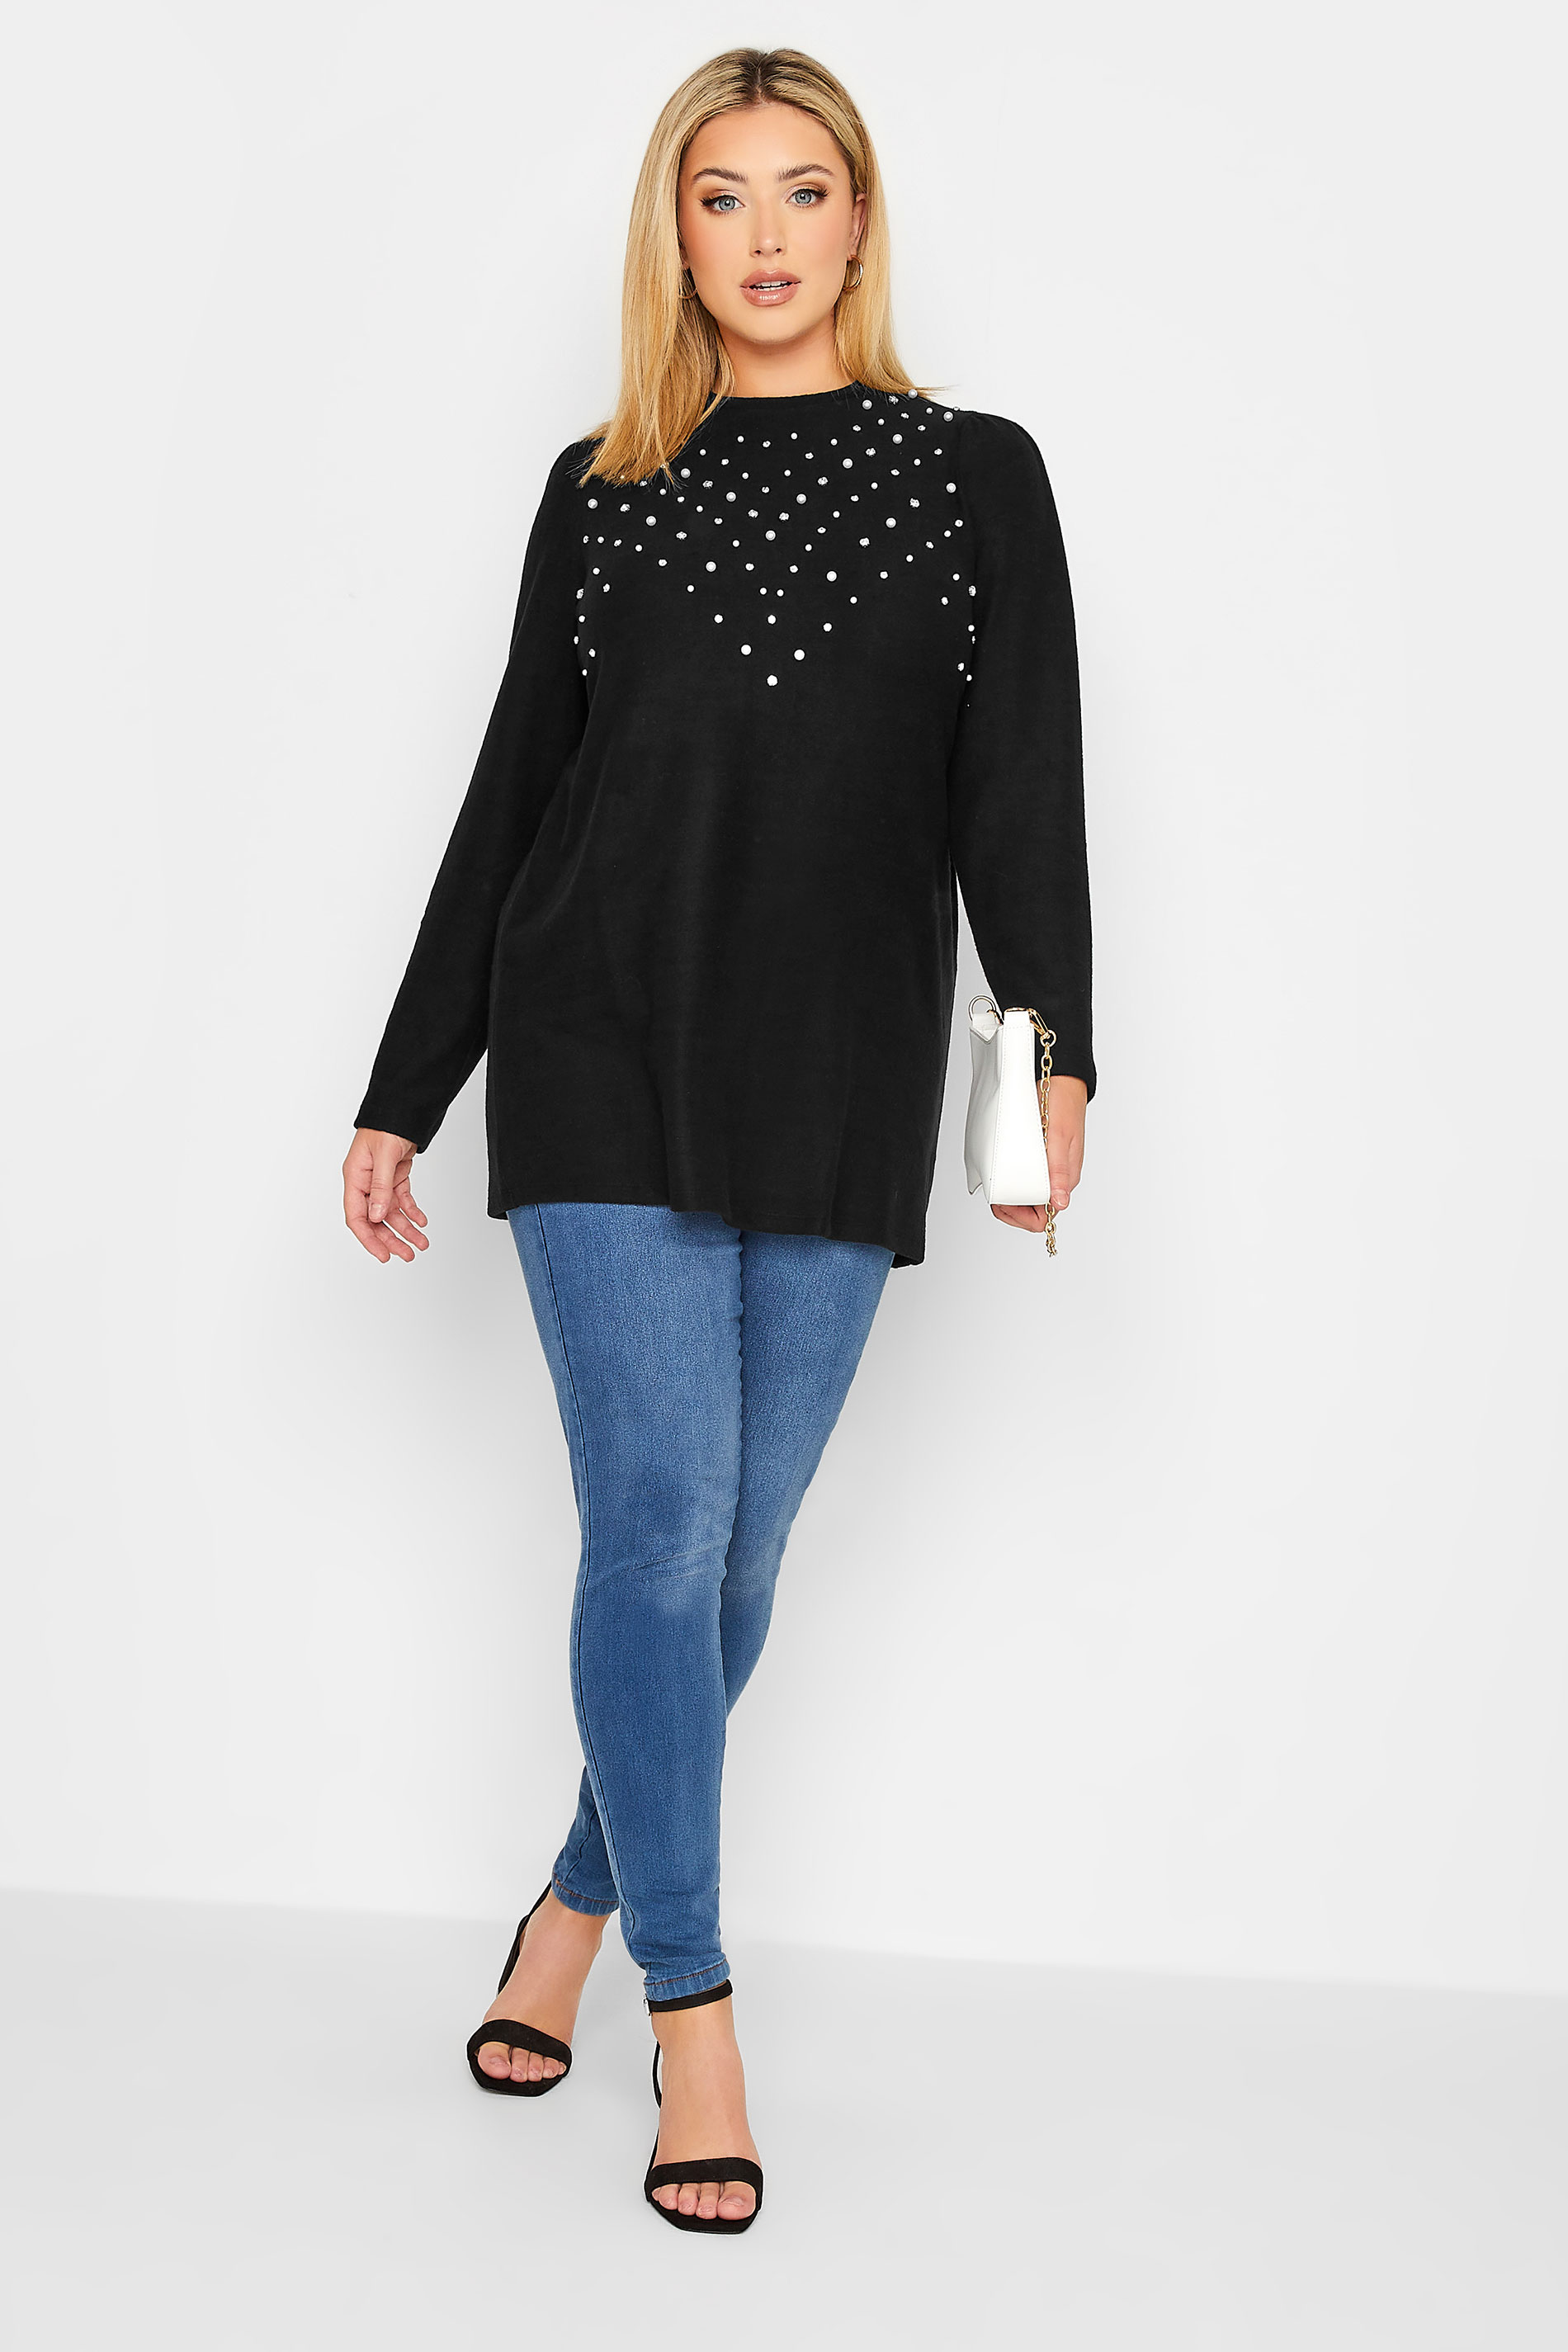 Plus Size Black Pearl Embellished Soft Touch Top | Yours Clothing 2